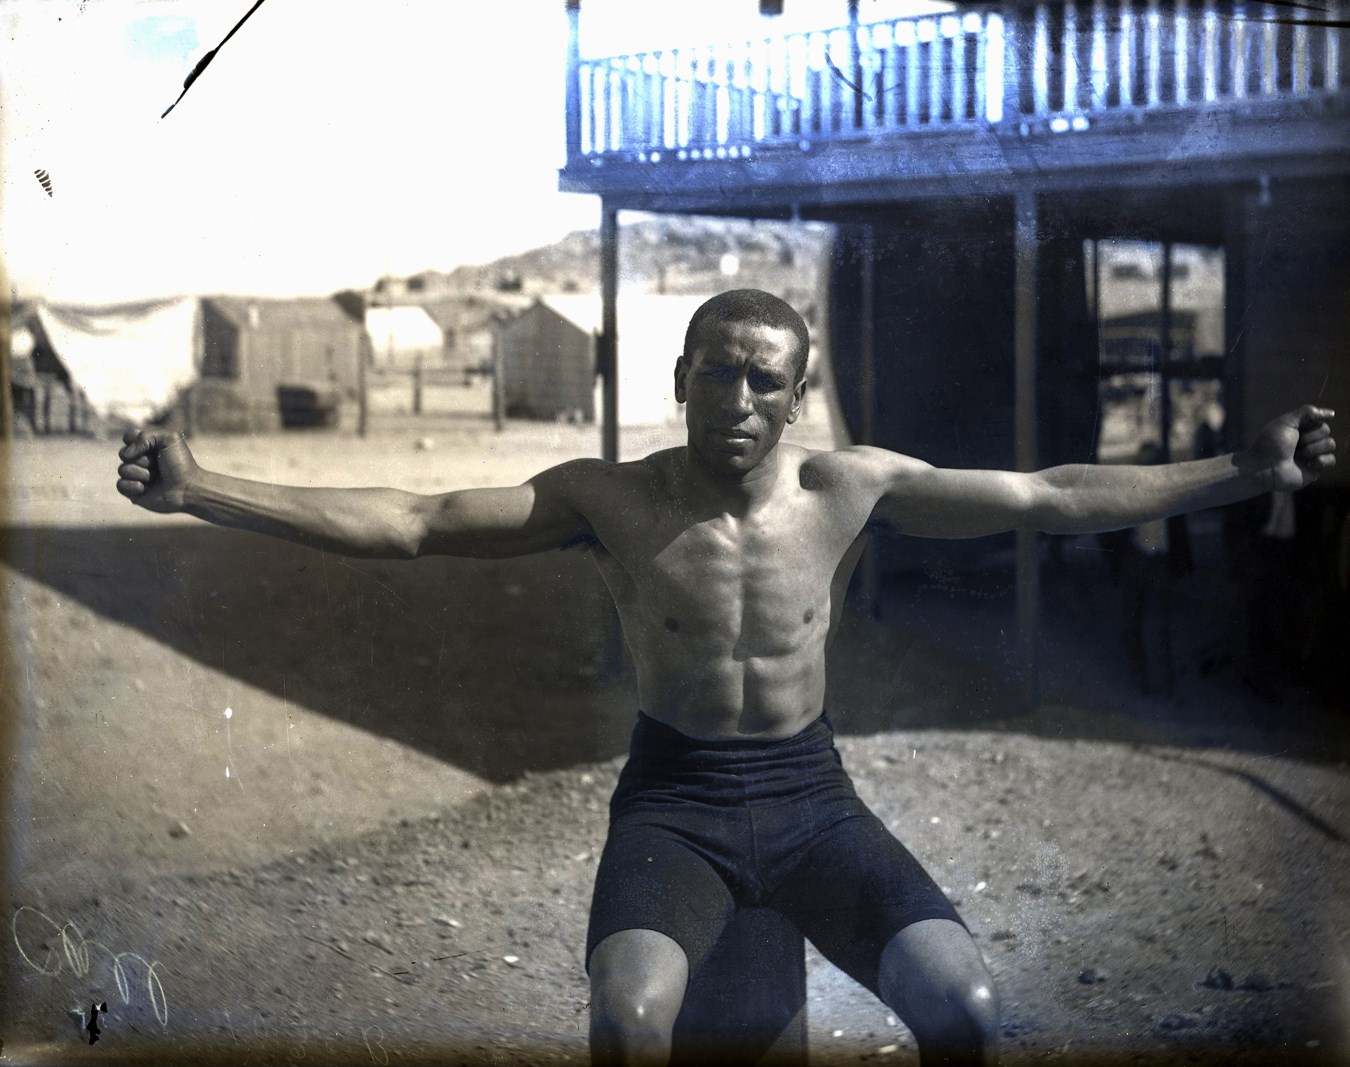 Dana Collection Of Important Boxing Negatives - 1906 Joe Gans "in Goldfield" Historic Meeting Battling Nelson From-the-Camera Original Glass Plate Negative by the Dana Studio